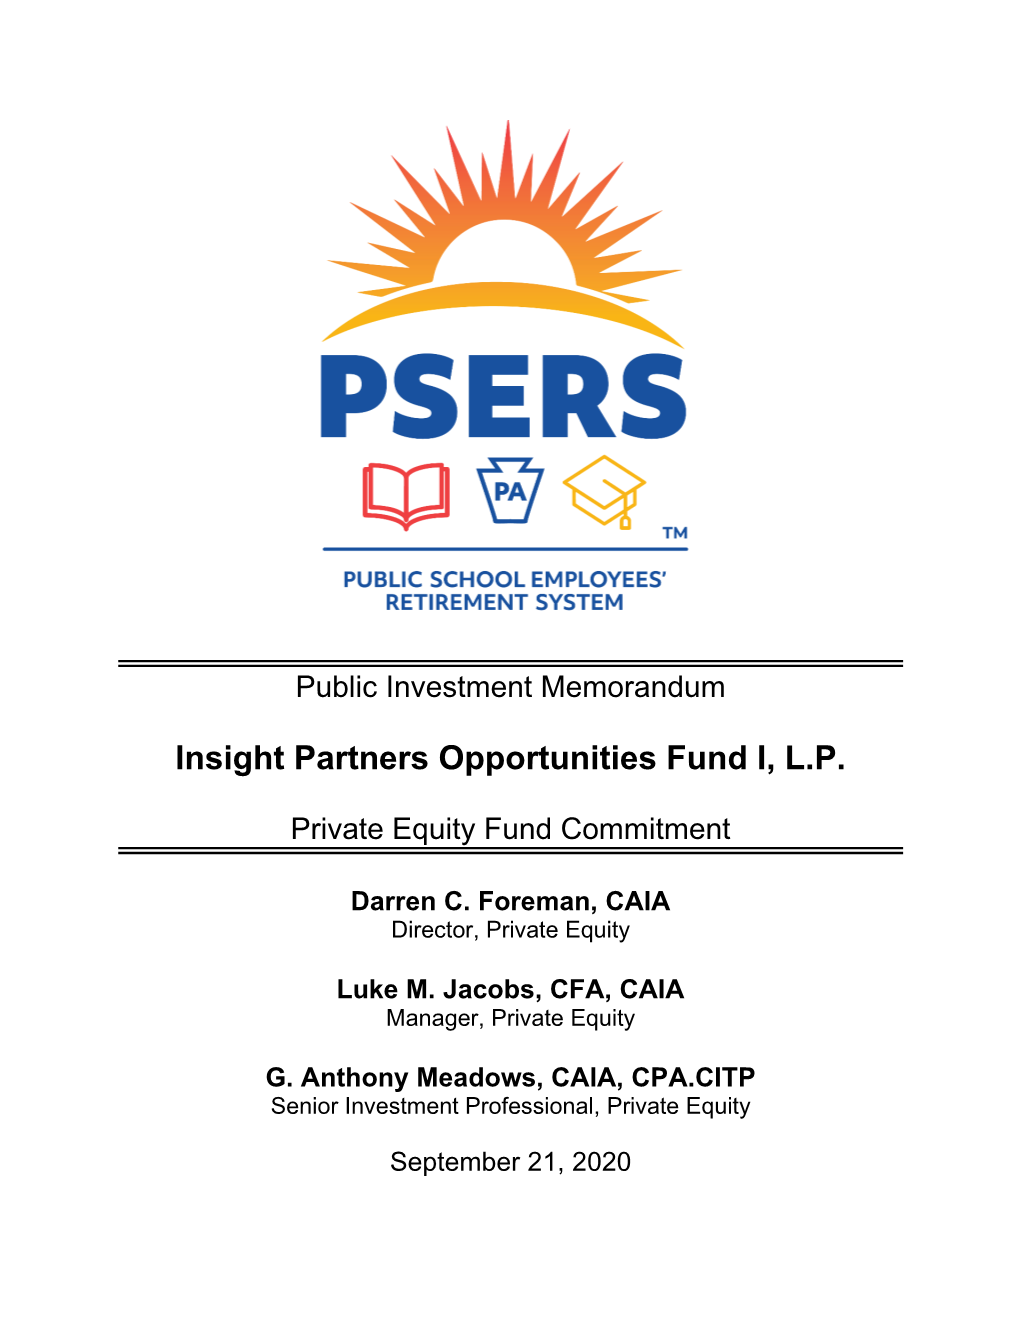 Insight Partners Opportunities Fund I, L.P